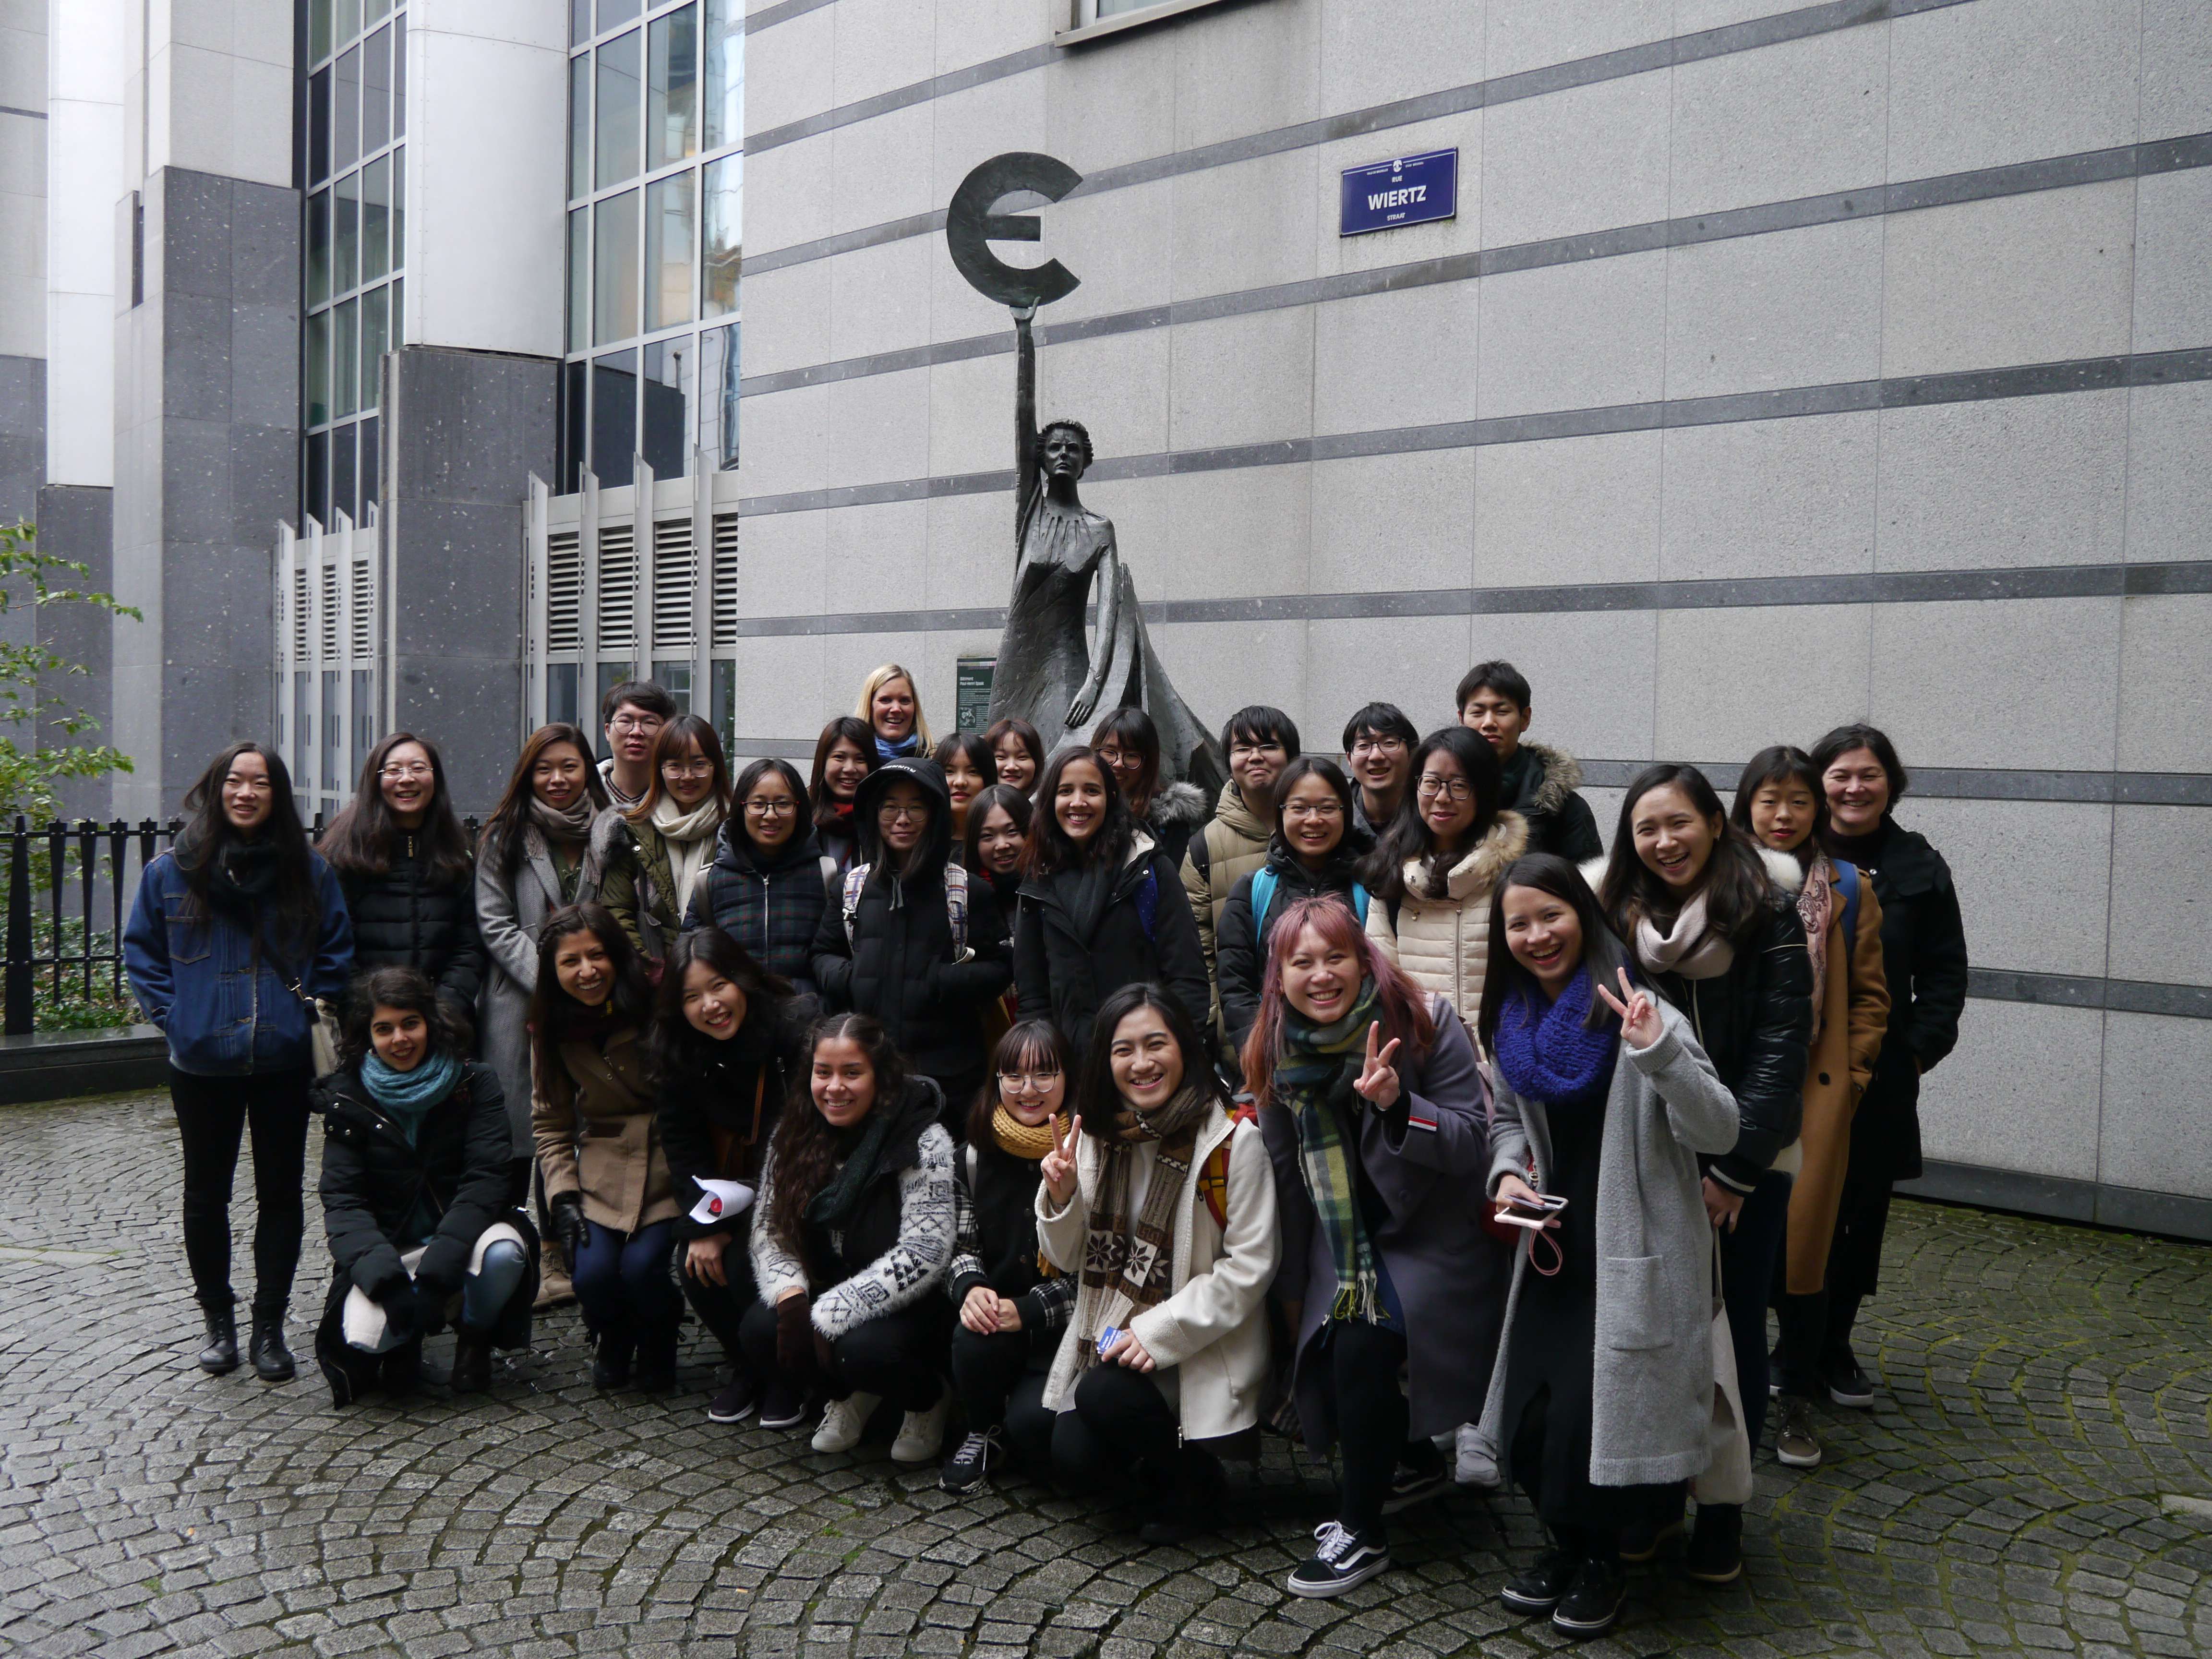 Group photo in Brussels